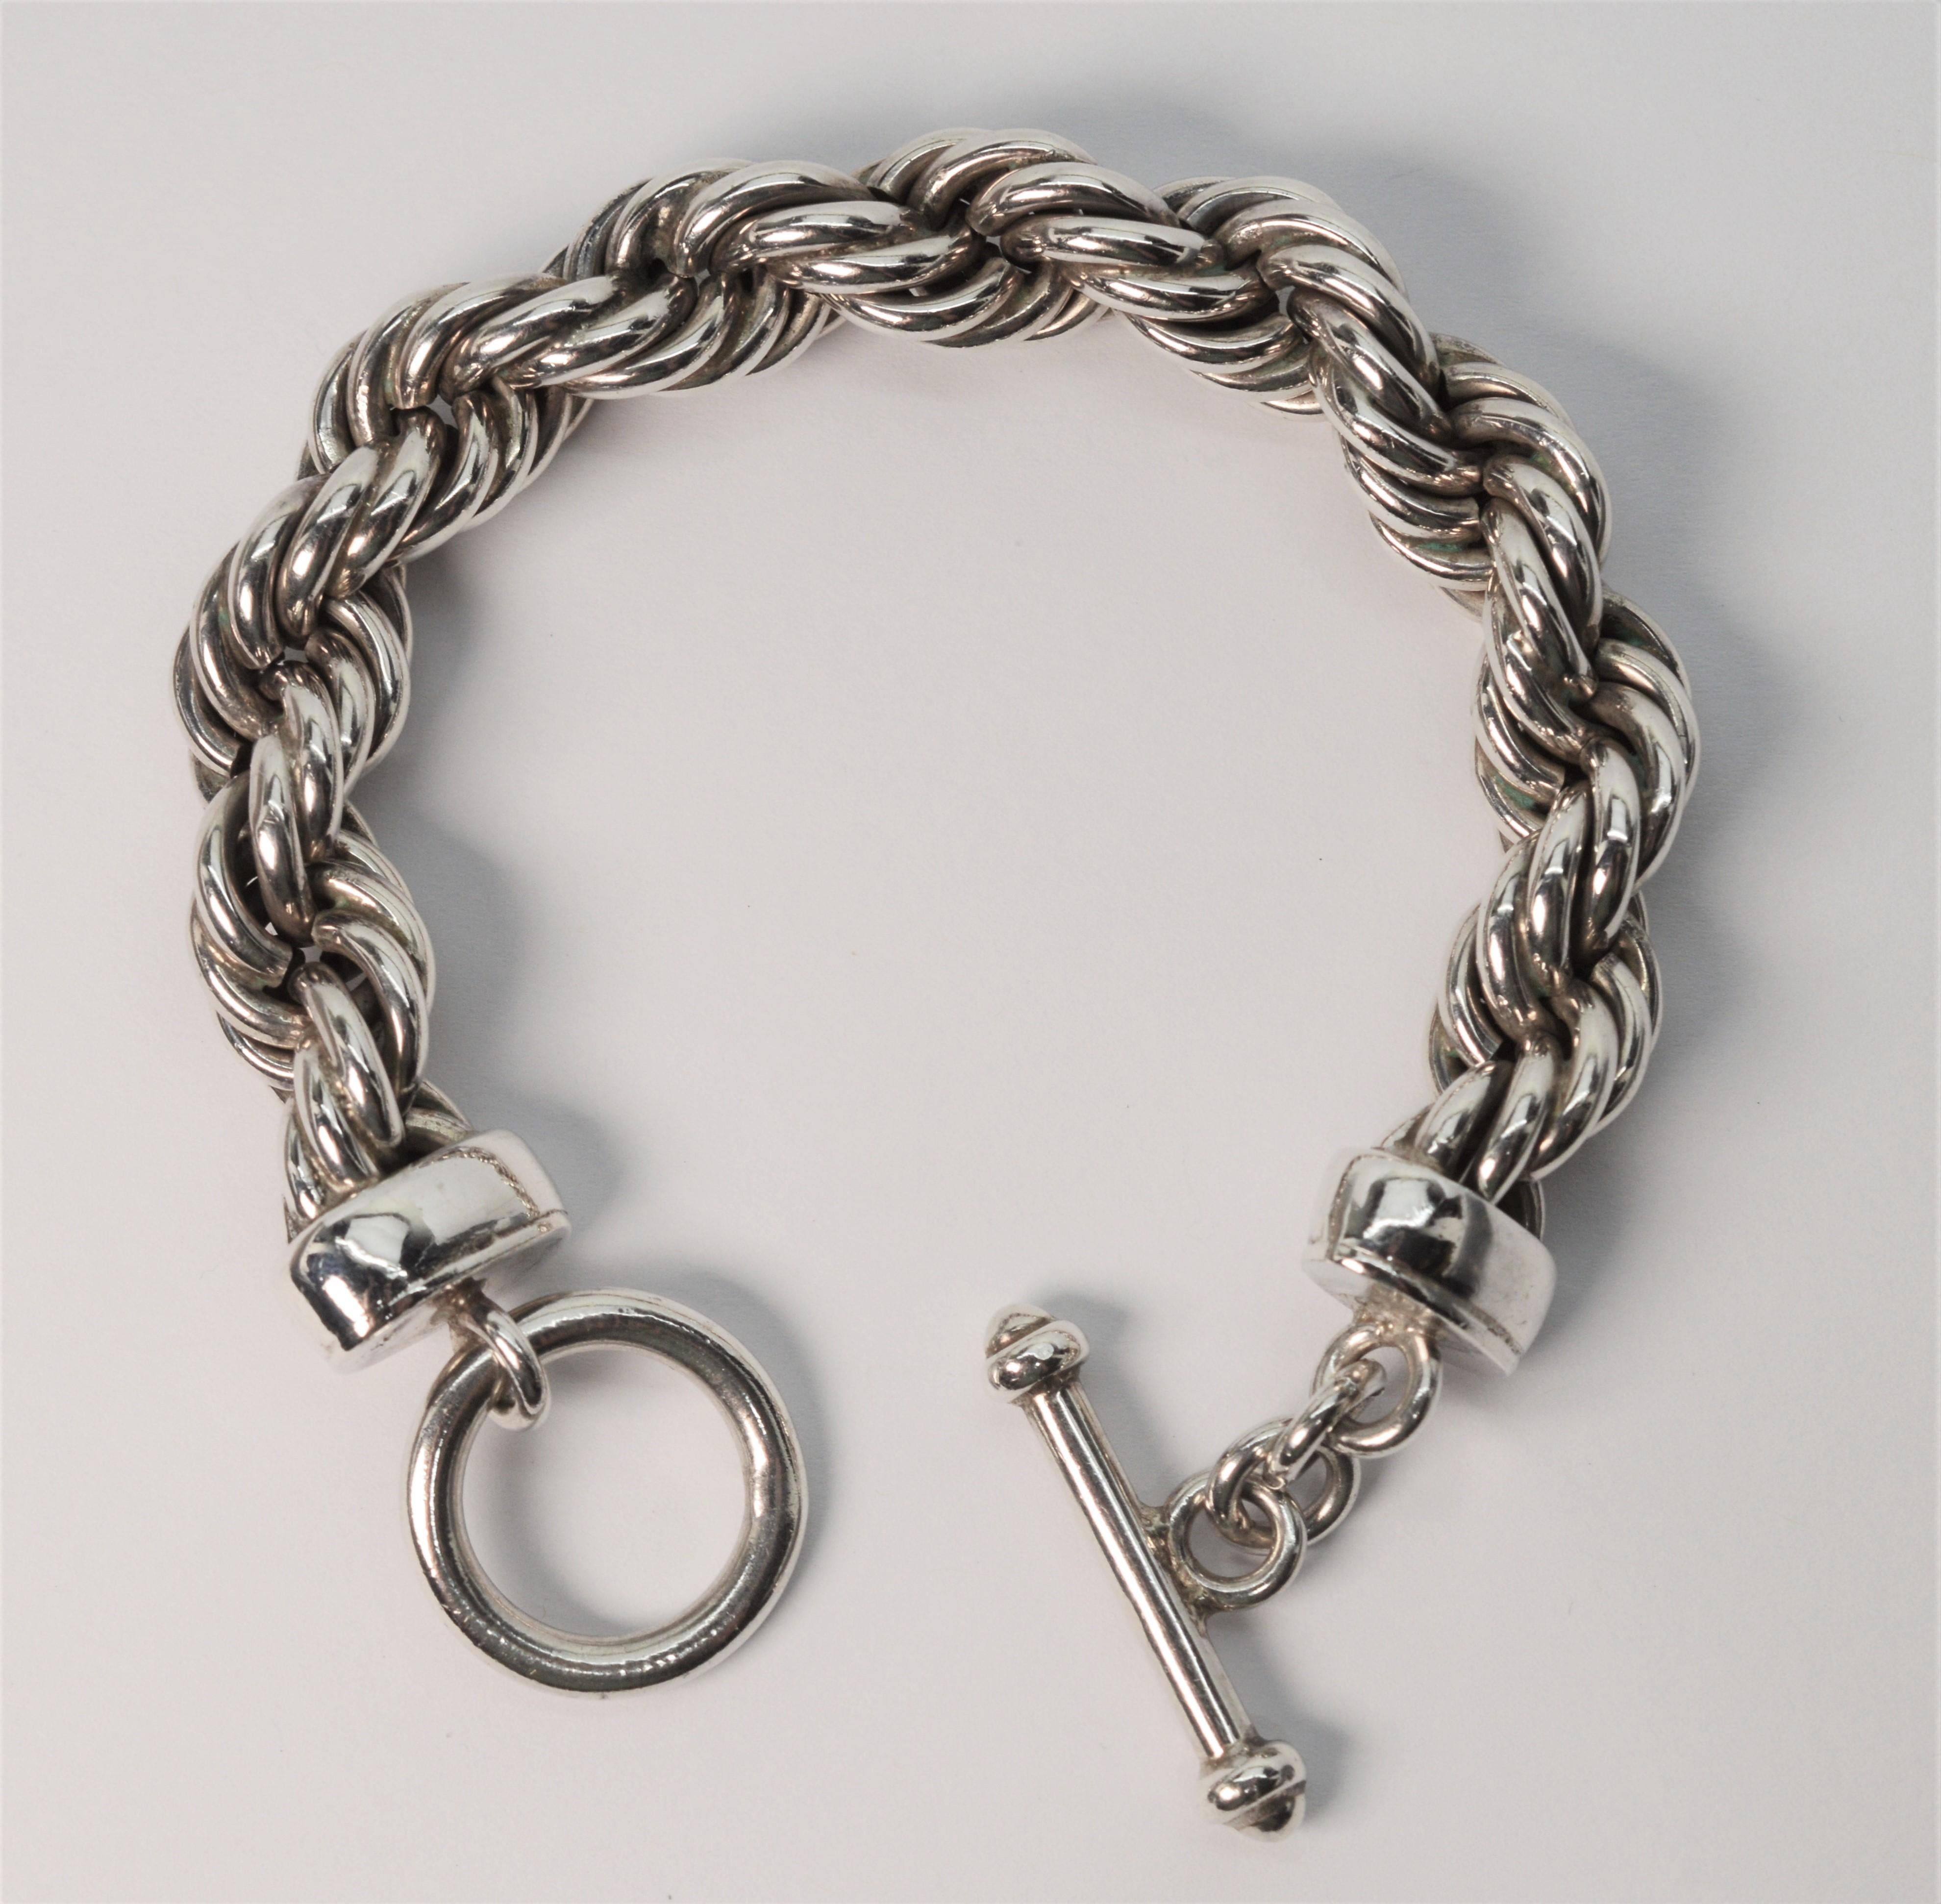 Attention silver lovers, here is a hard to find bold sterling silver bracelet with a substantial profile. This vintage piece is made of 11.5 mm silver rope chain with a interesting twisted weave giving the chain volume. The bracelet measures 7.5